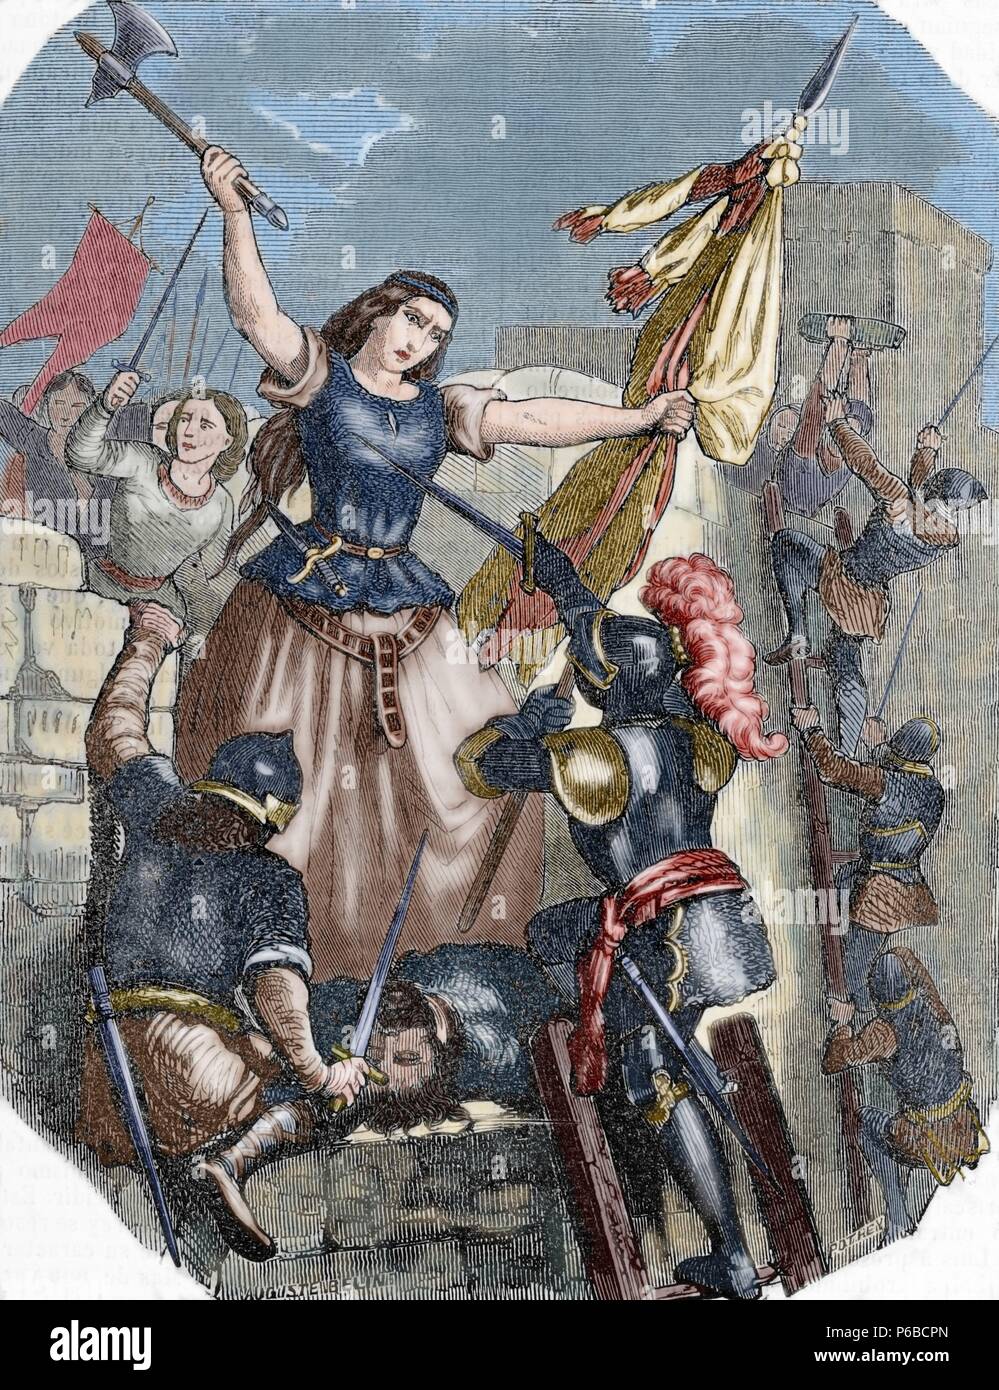 Jeanne Hachette (b.1456). French heroine. Jeanne Hachette during the Beauvais site, June 27, 1472. Engraving by Pothey. Popular Universal Library Editions, 1851. Colored. Stock Photo